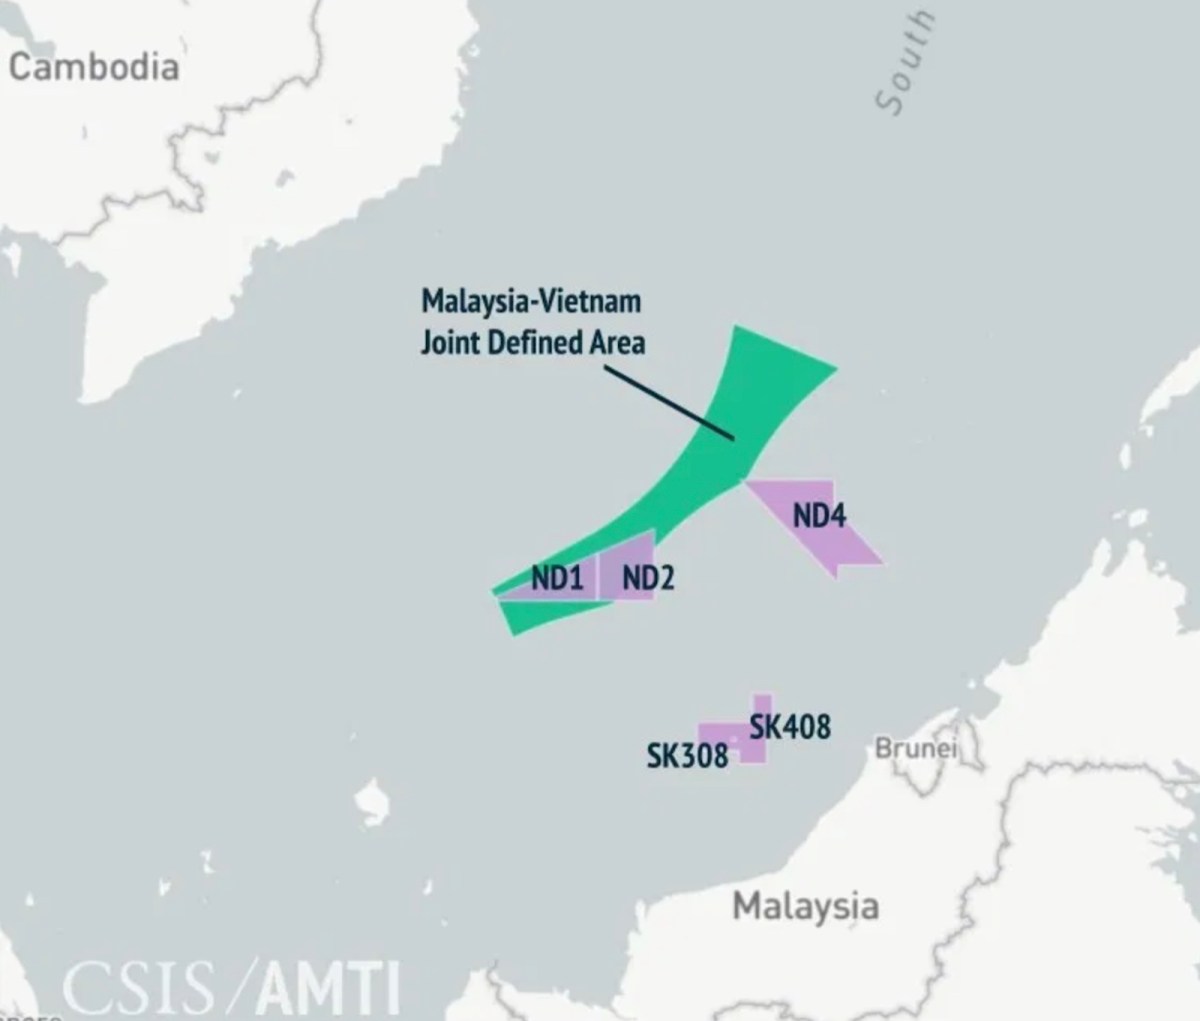 Practice on Provisional Arrangements in maritime Disputed Areas, JOINT DEVELOPMENT ZONES, Malaysia-Vietnam case